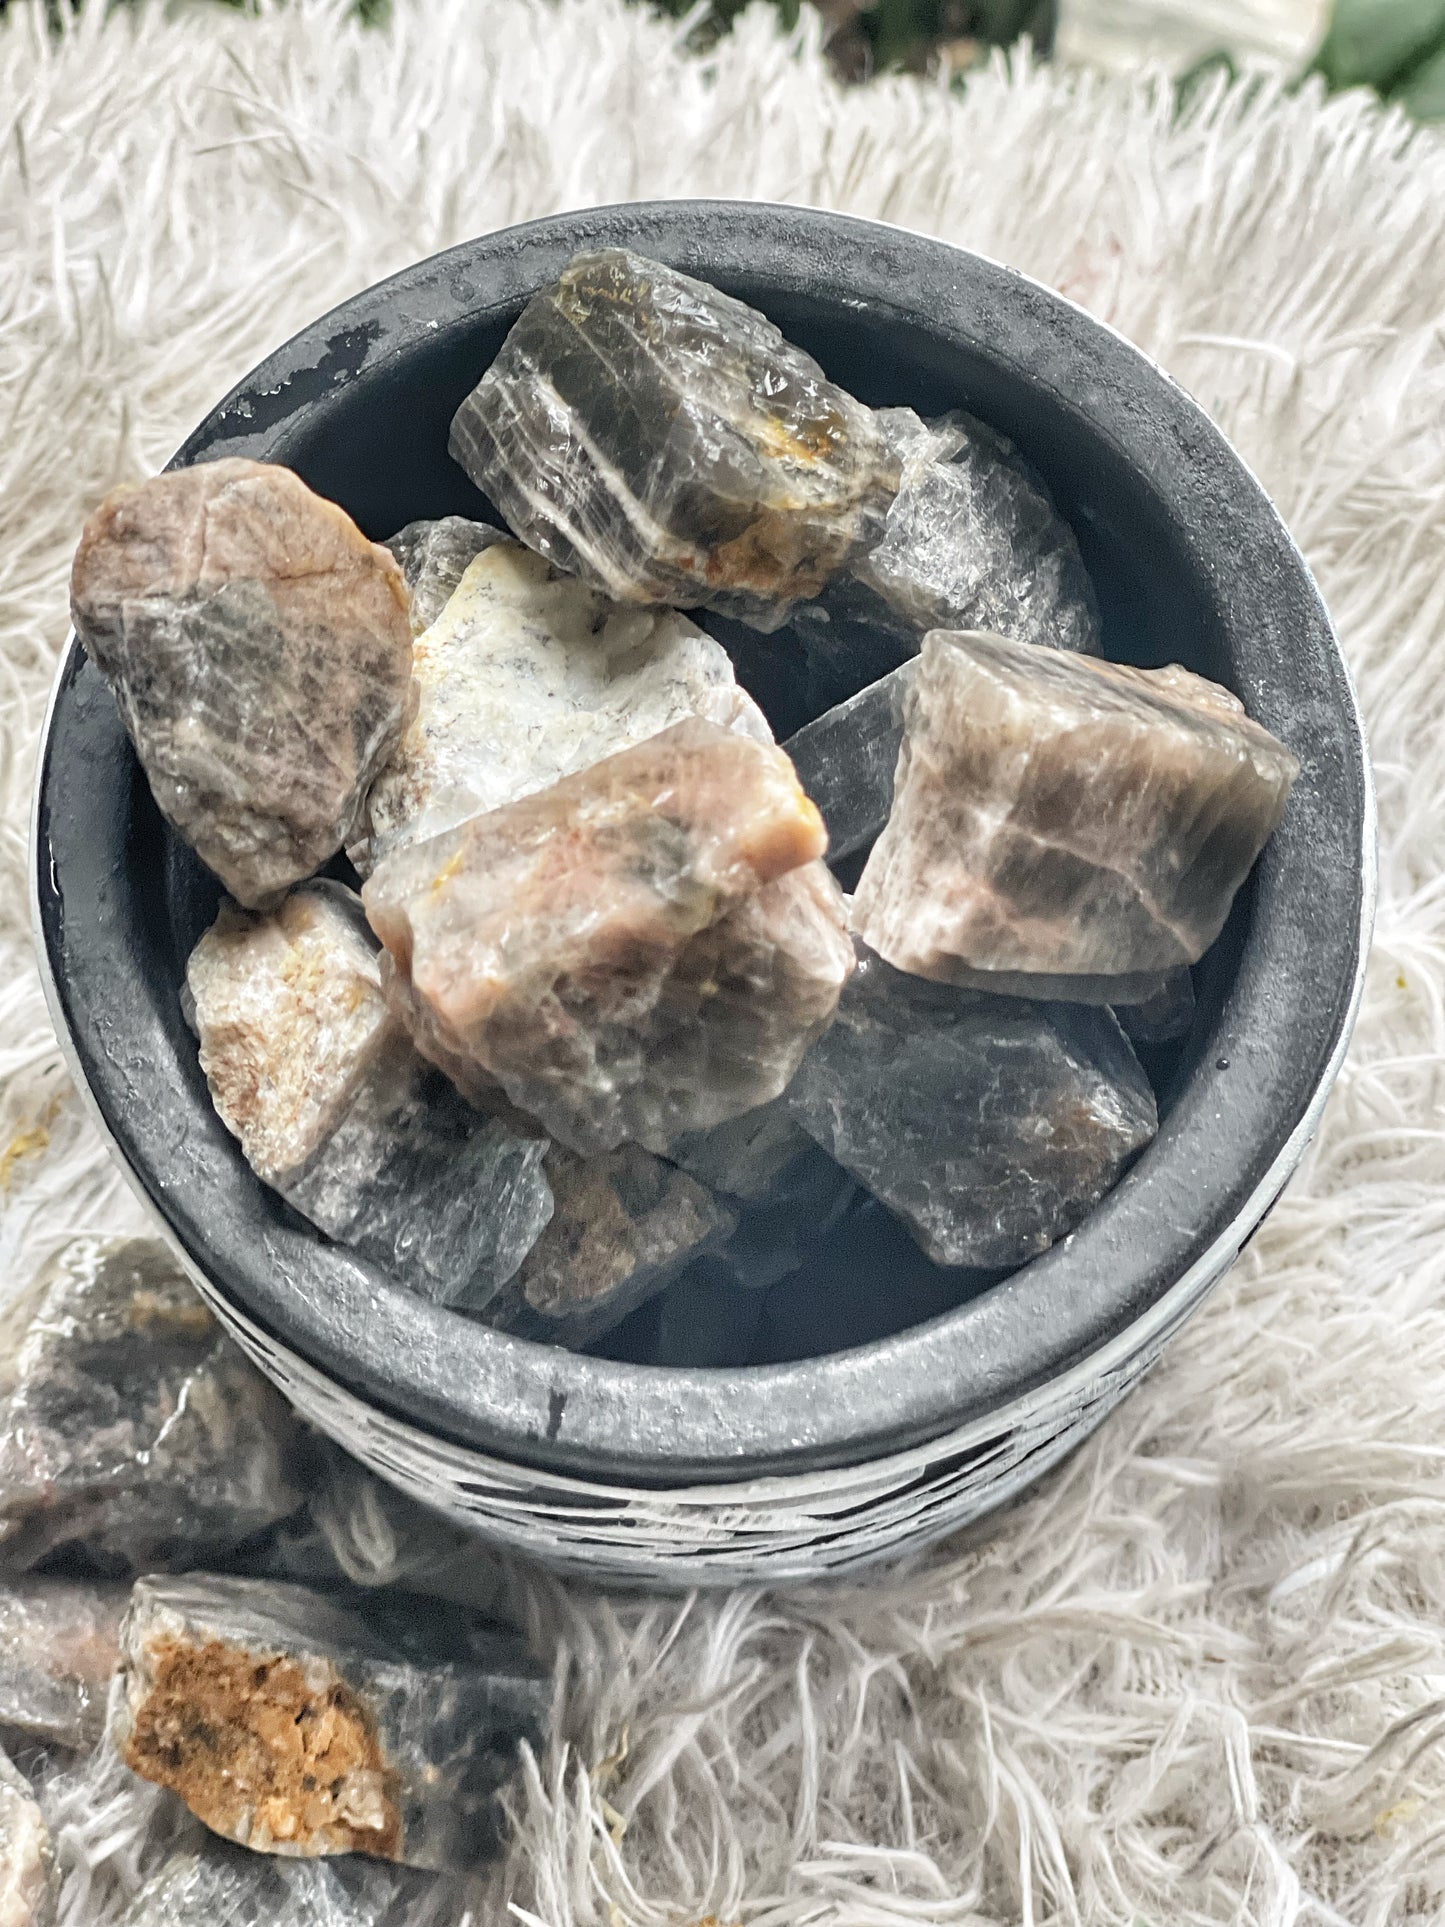 Black Moonstone for new moon magic, grounding, and protection